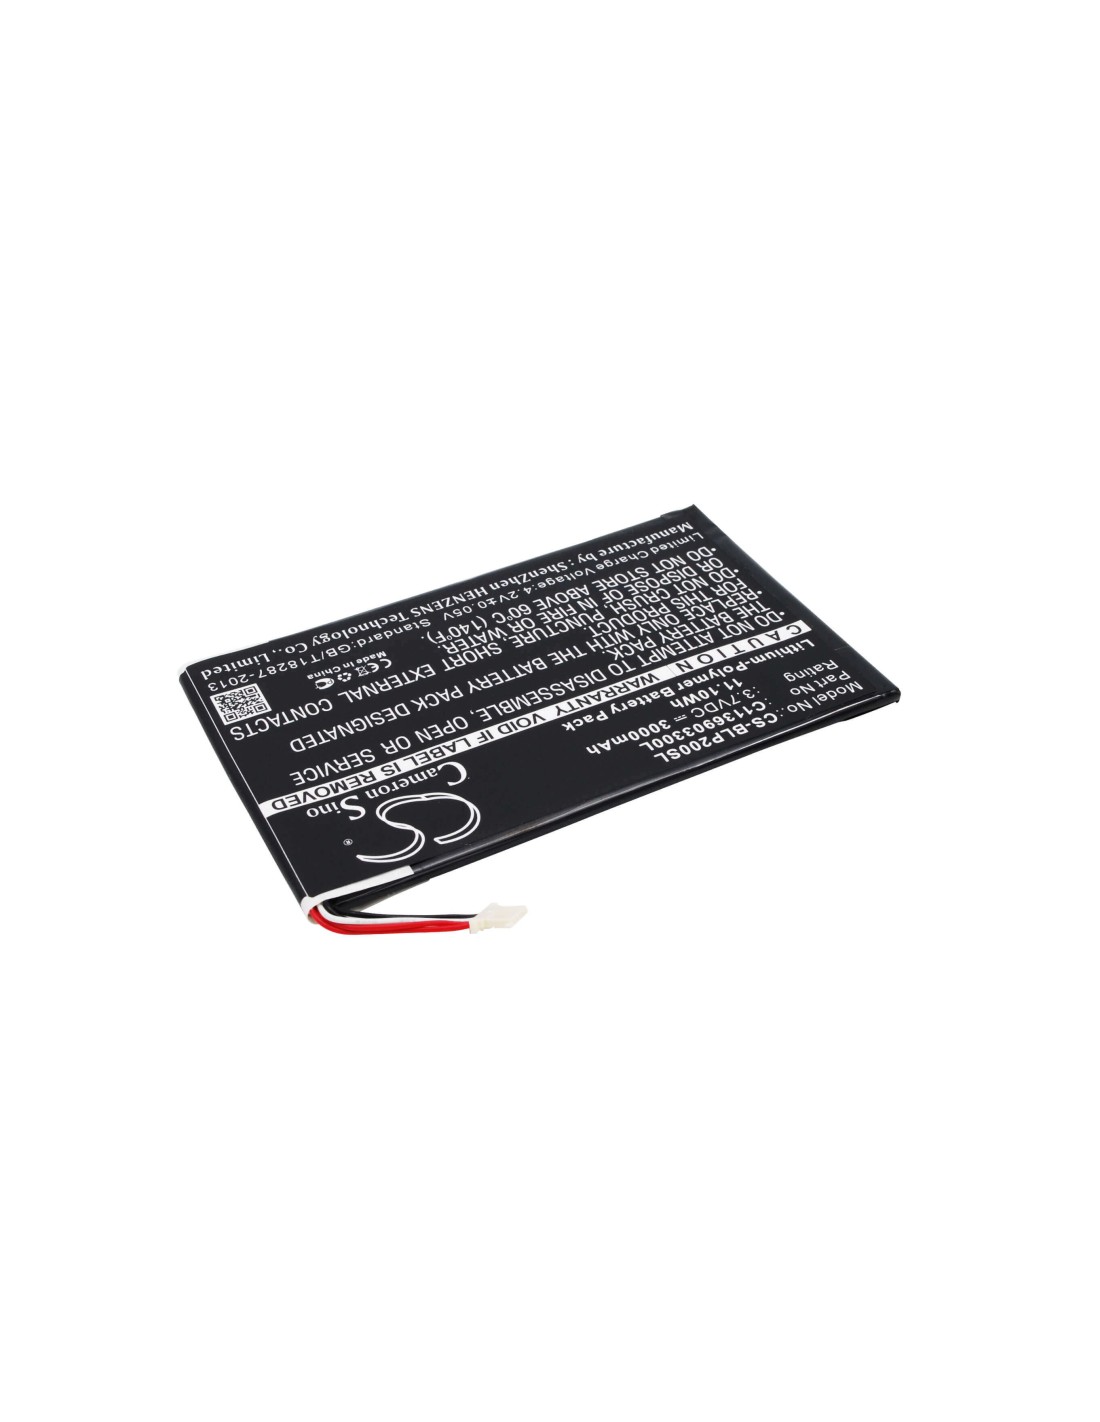 Battery for Blu Touchbook 7.0 3g, P200, Touch Book 7 3g 3.7V, 3000mAh - 11.10Wh